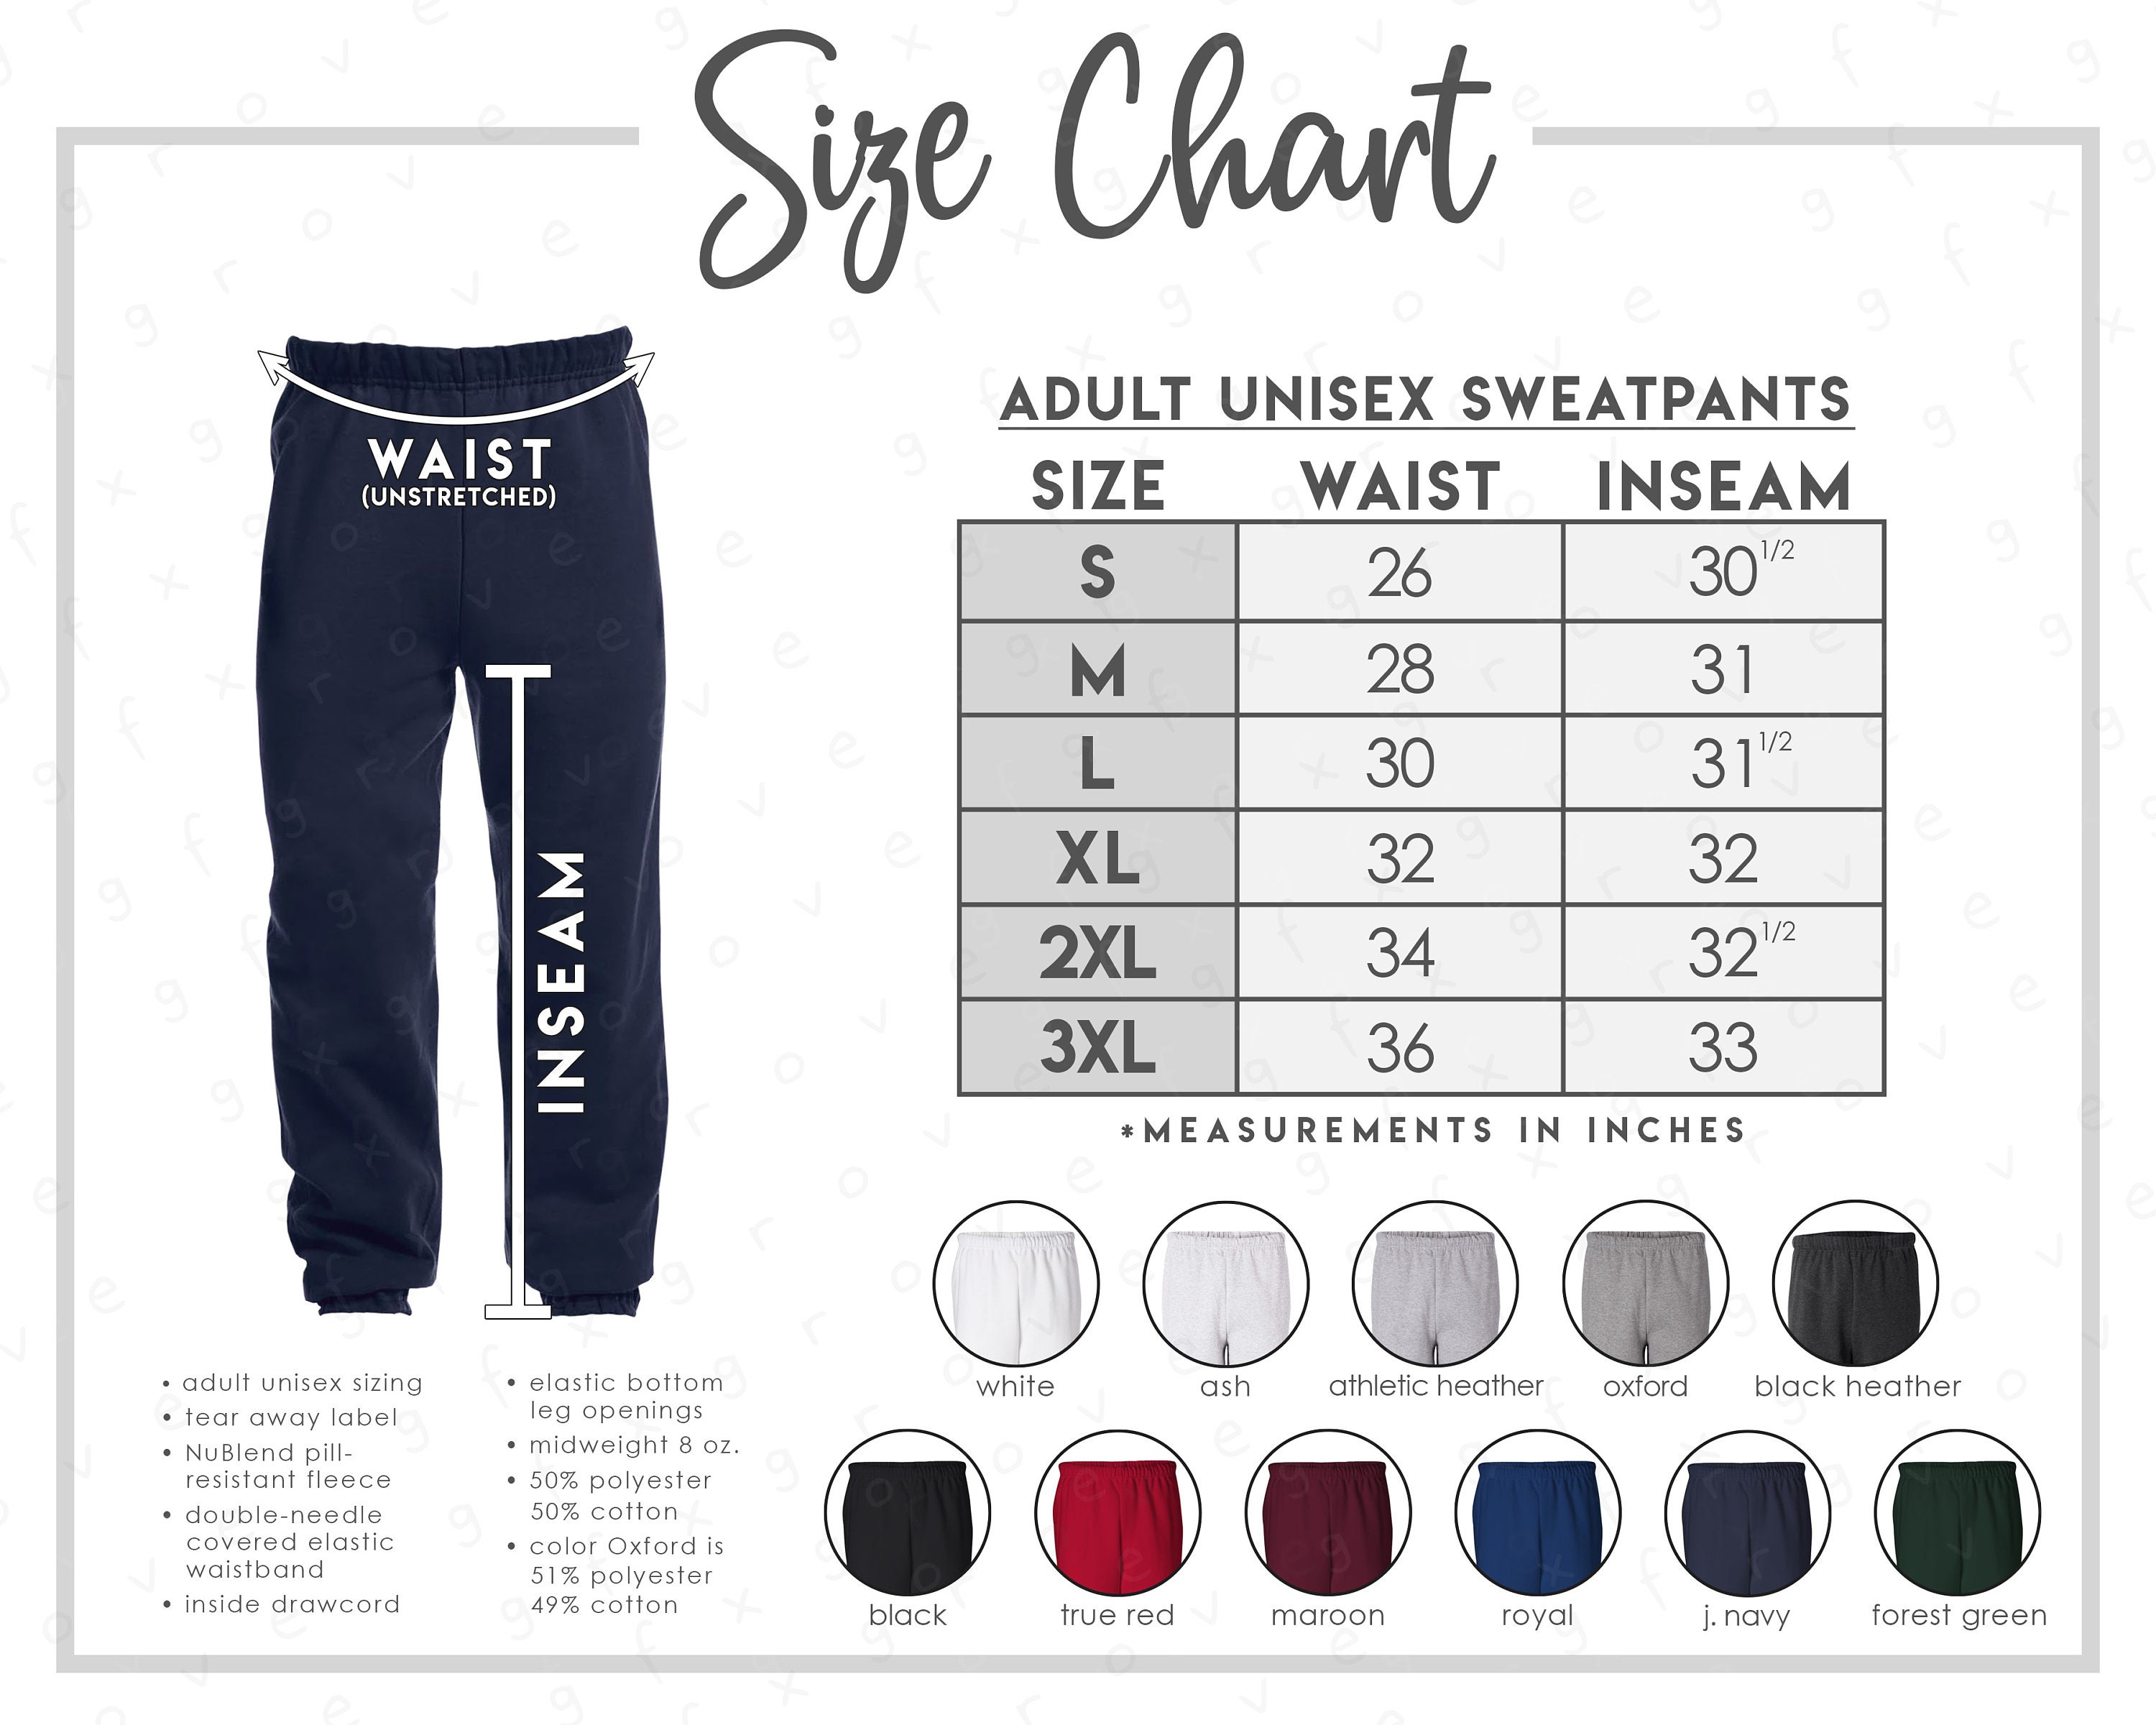 Jerzees 973MR Size Color Chart 2 Versions Included With & Without Branding  Jerzees Nublend Sweatpants Jerzees Sweatpants Jerzees 973 -  Canada